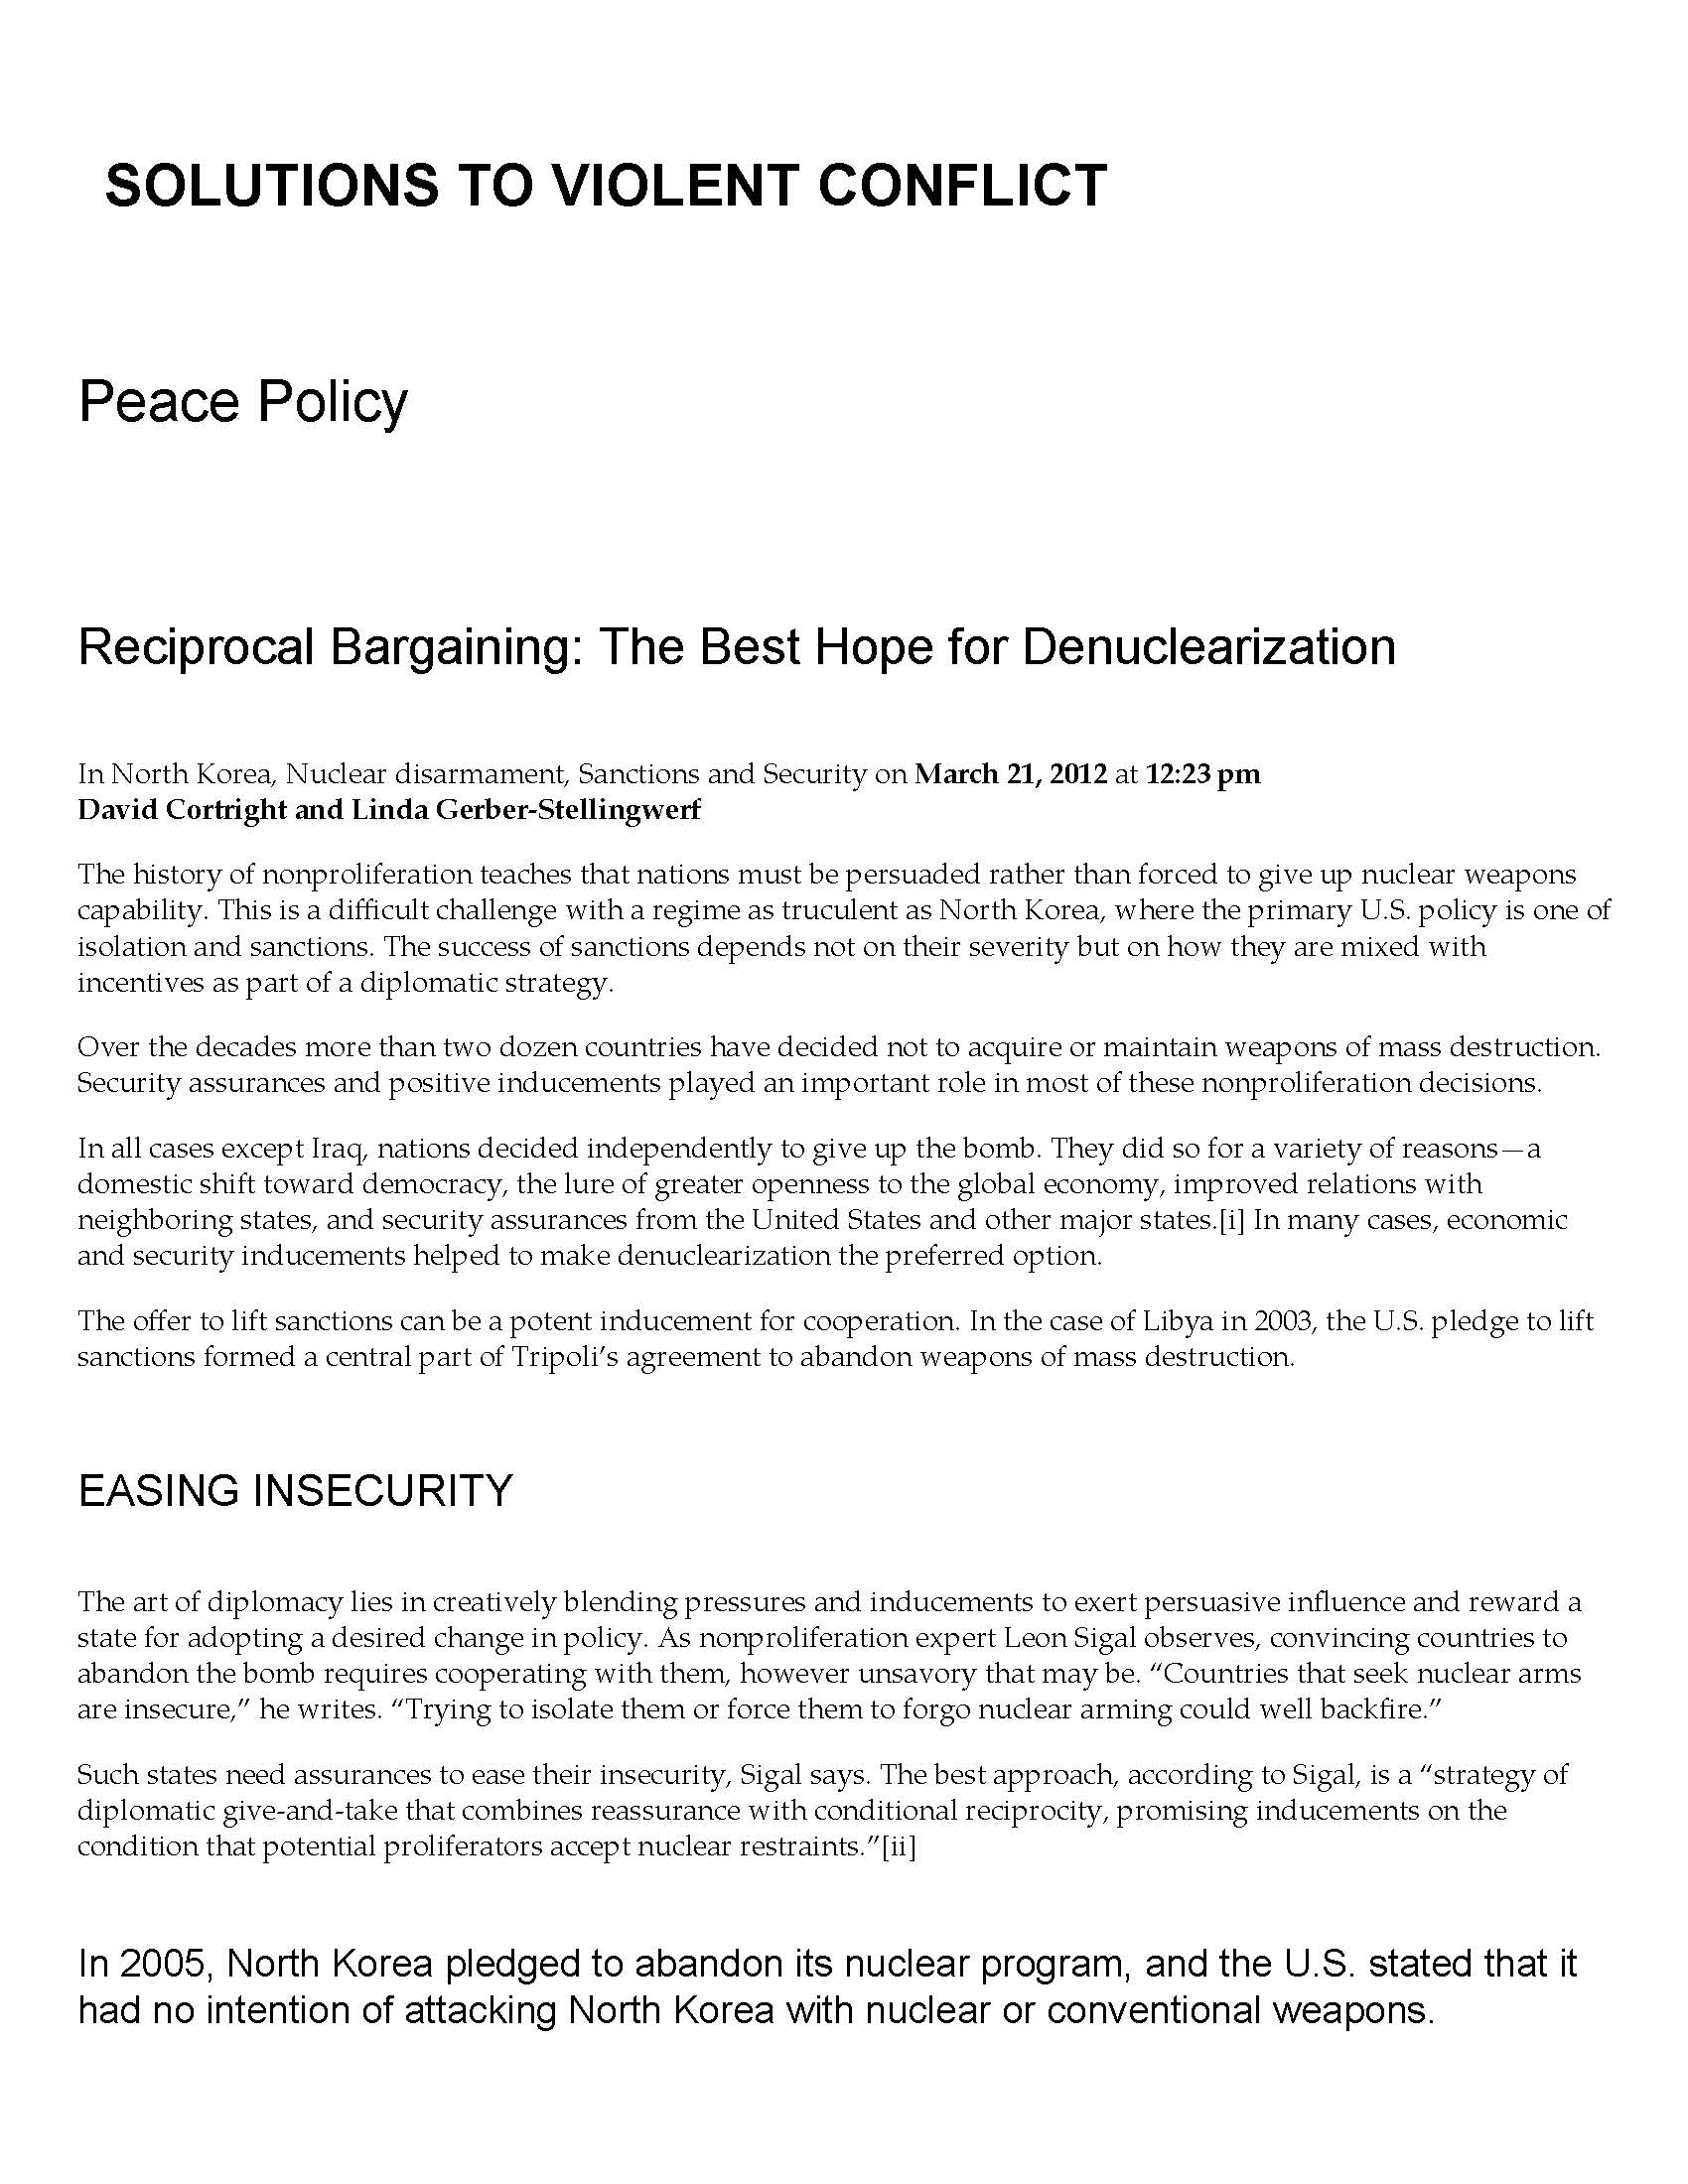 Reciprocal Bargaining: The Best Hope for Denuclearization